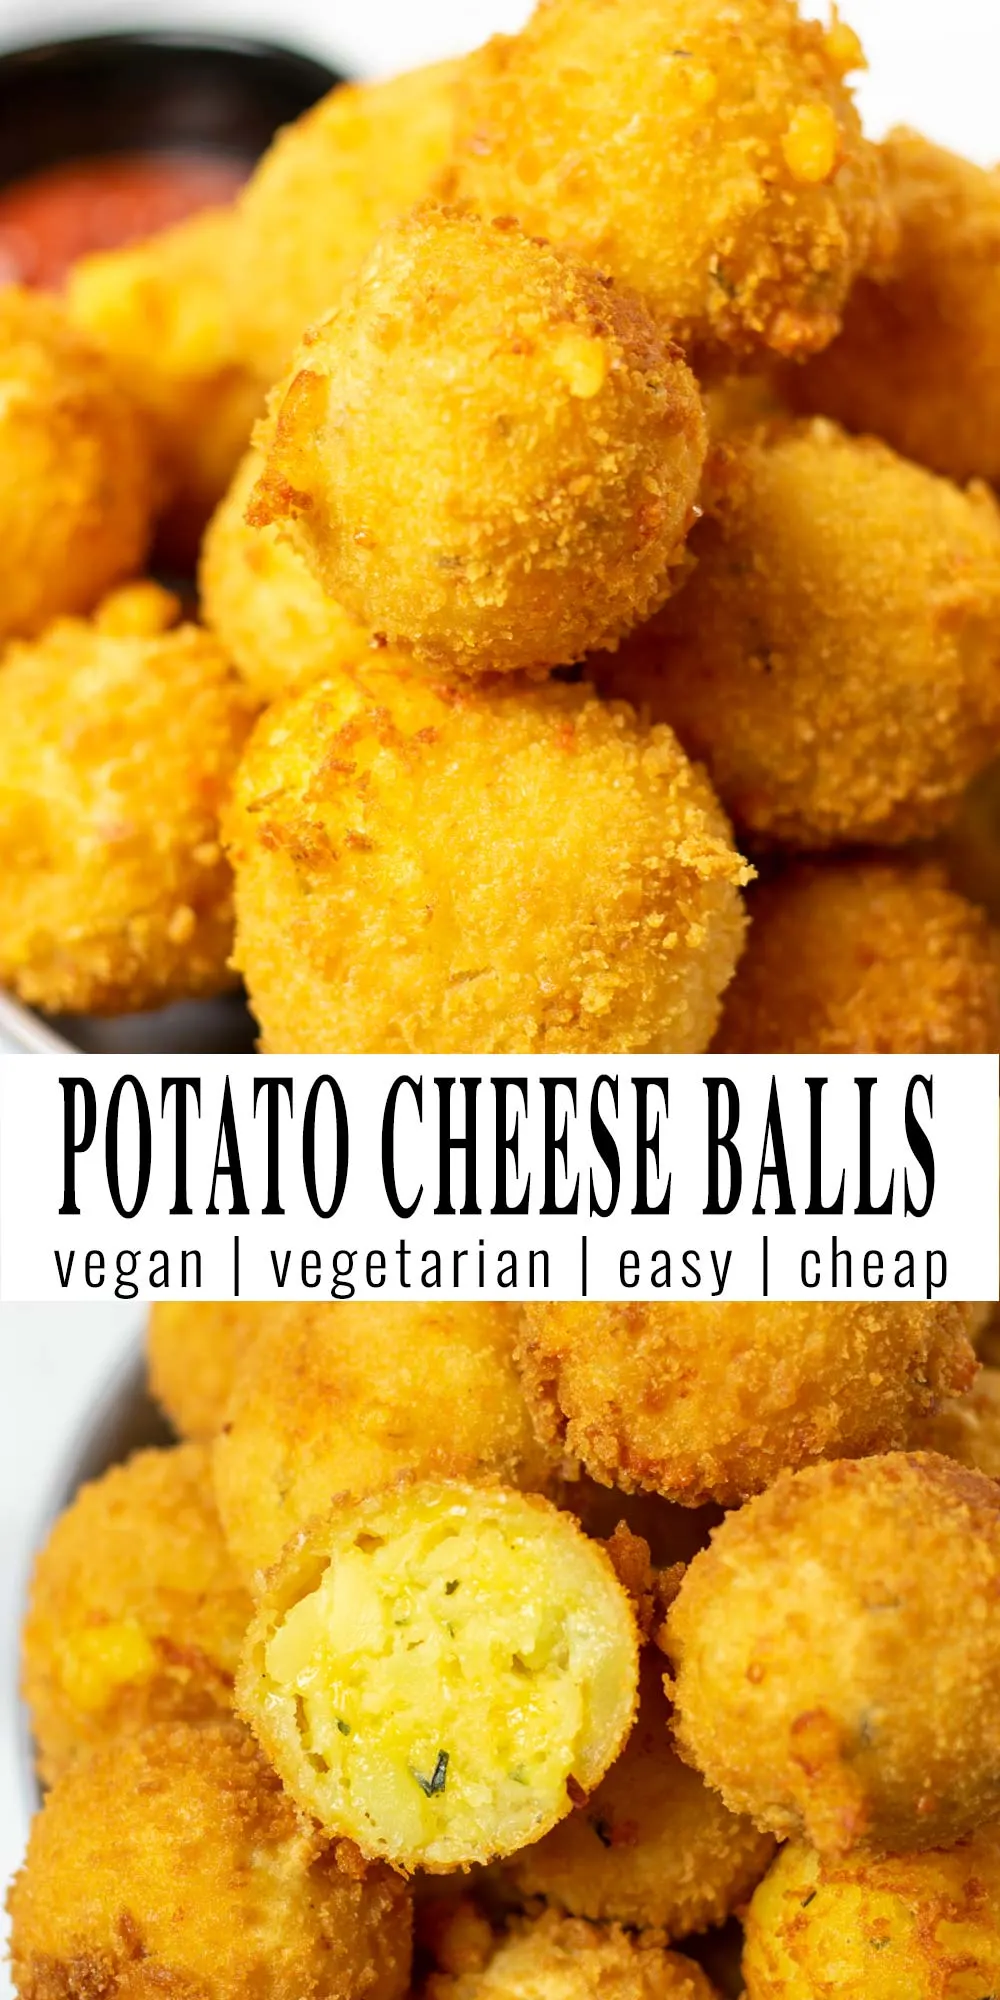 Collage of two pictures of the Potato Cheese Balls with recipe title text.